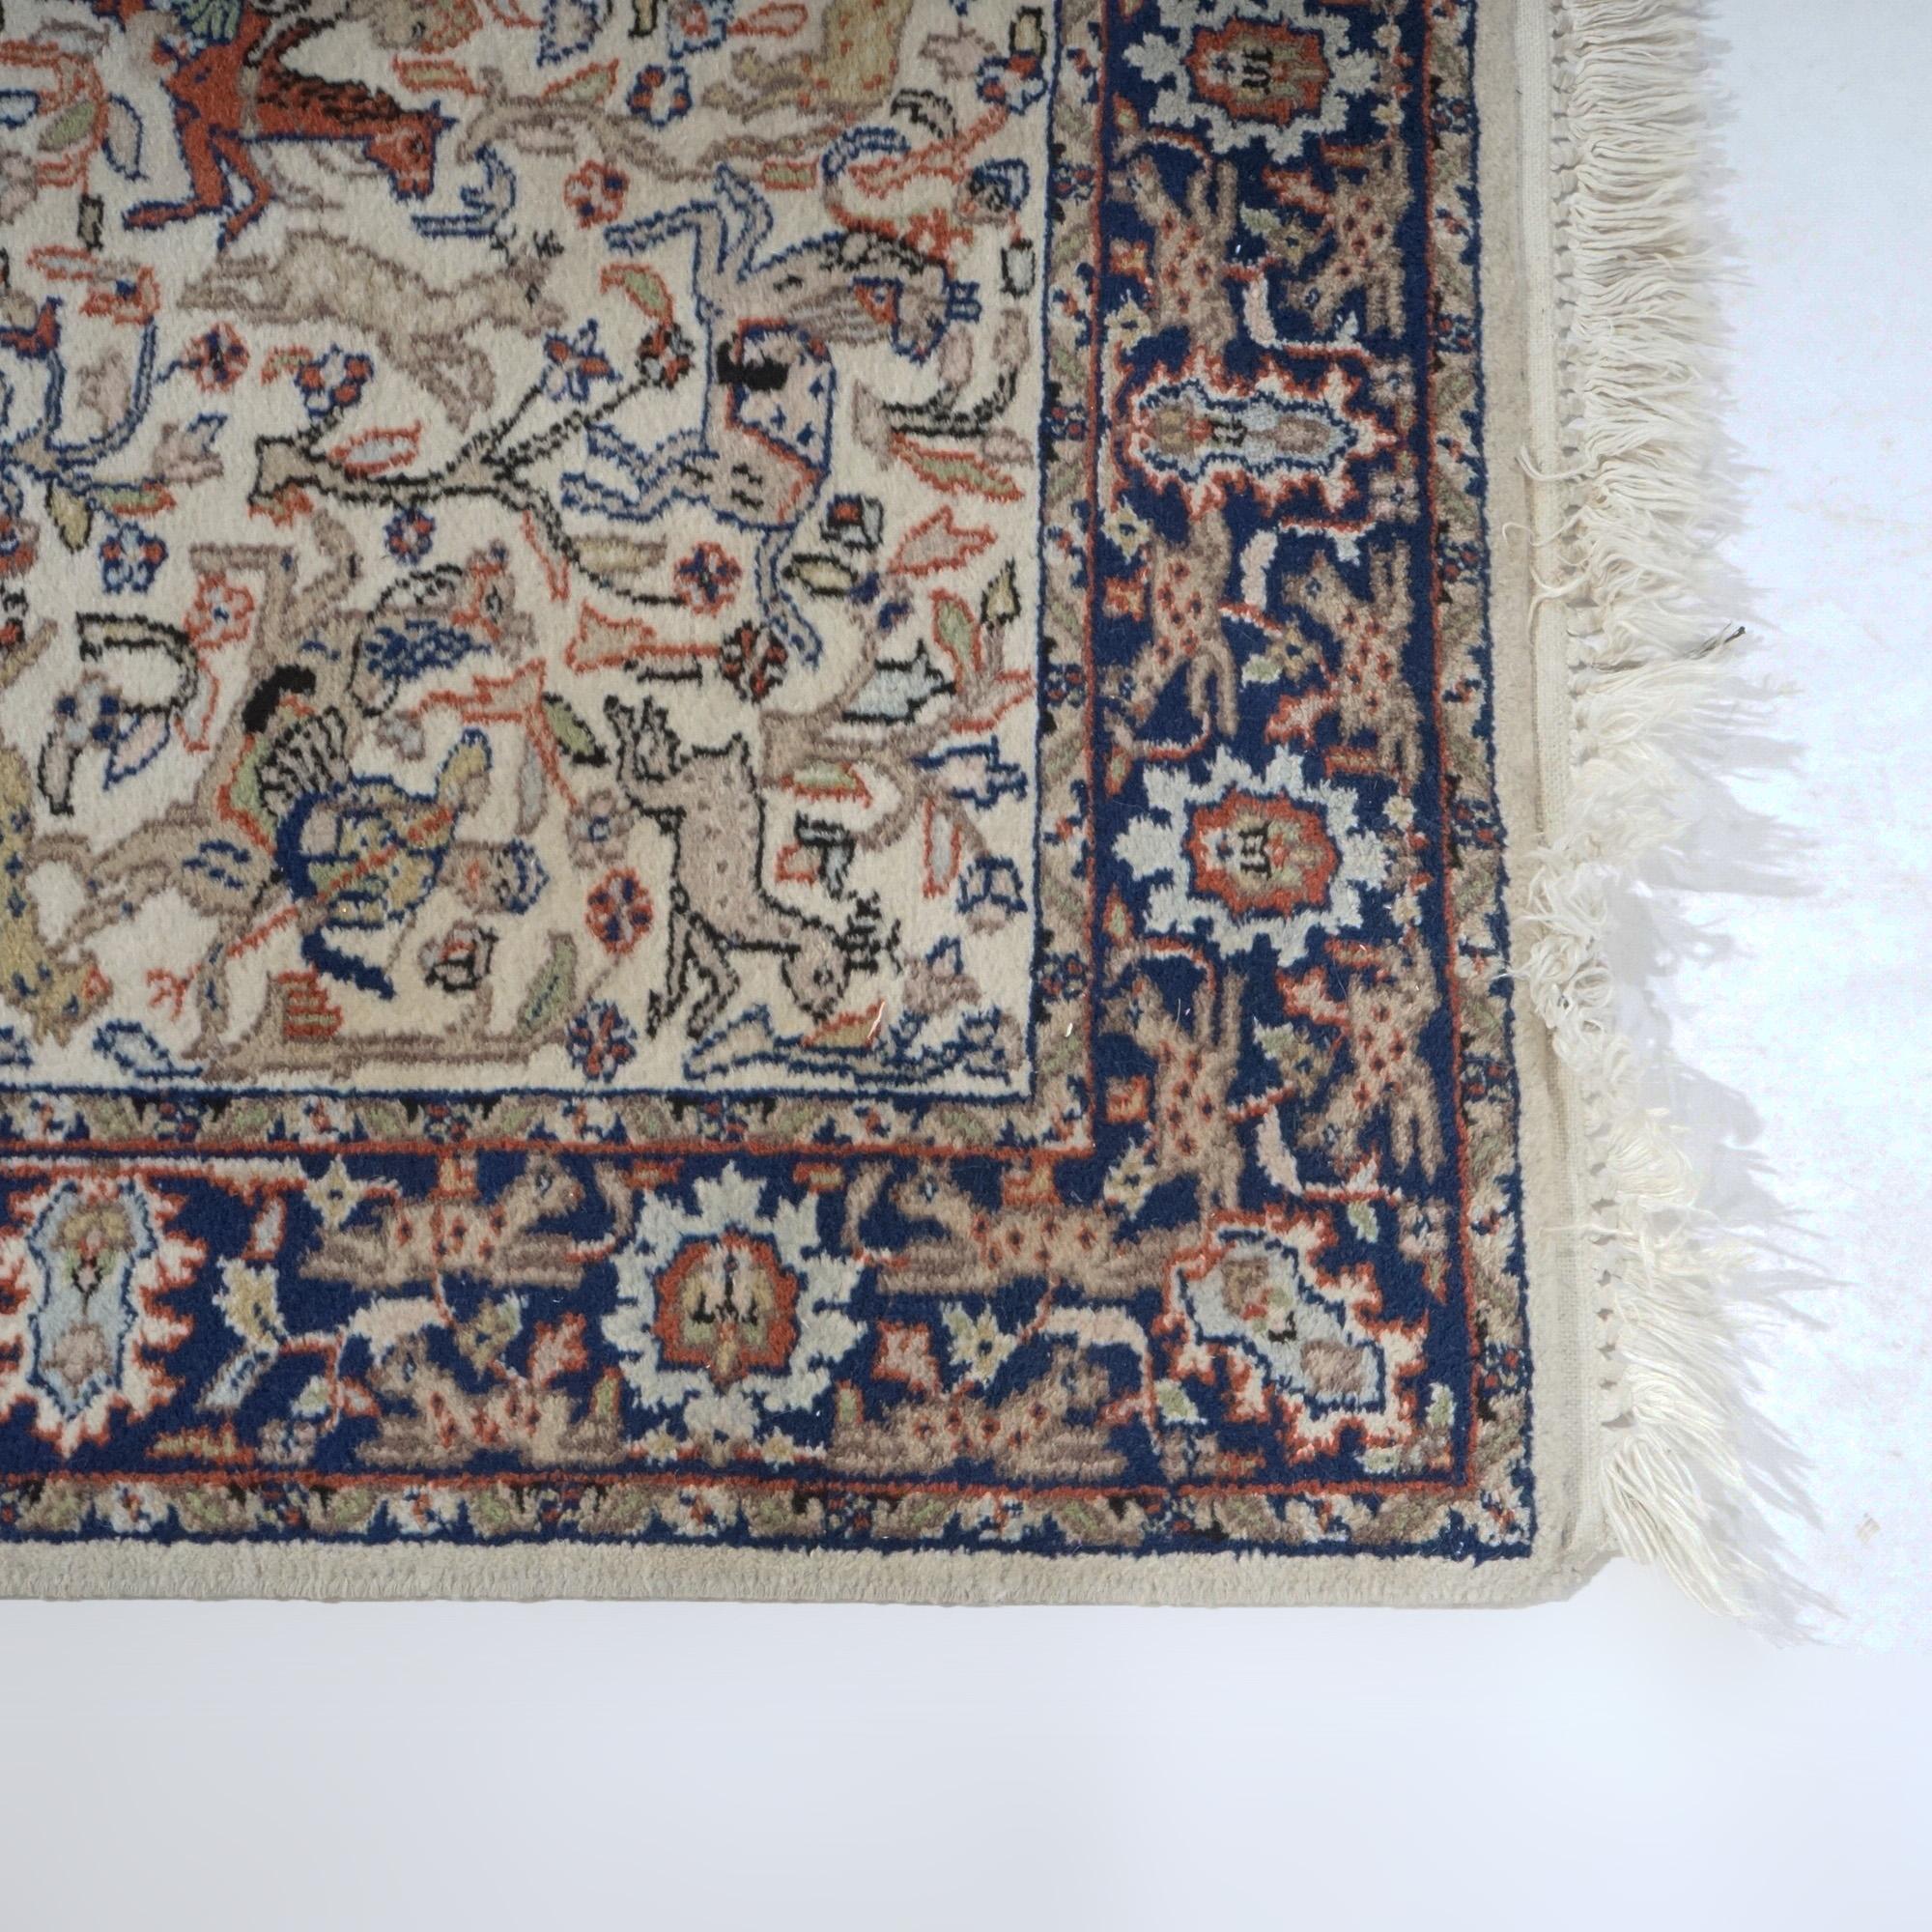 Tabriz Oriental Wool Hunt Rug with Figures & Animals, 20th Century For Sale 12